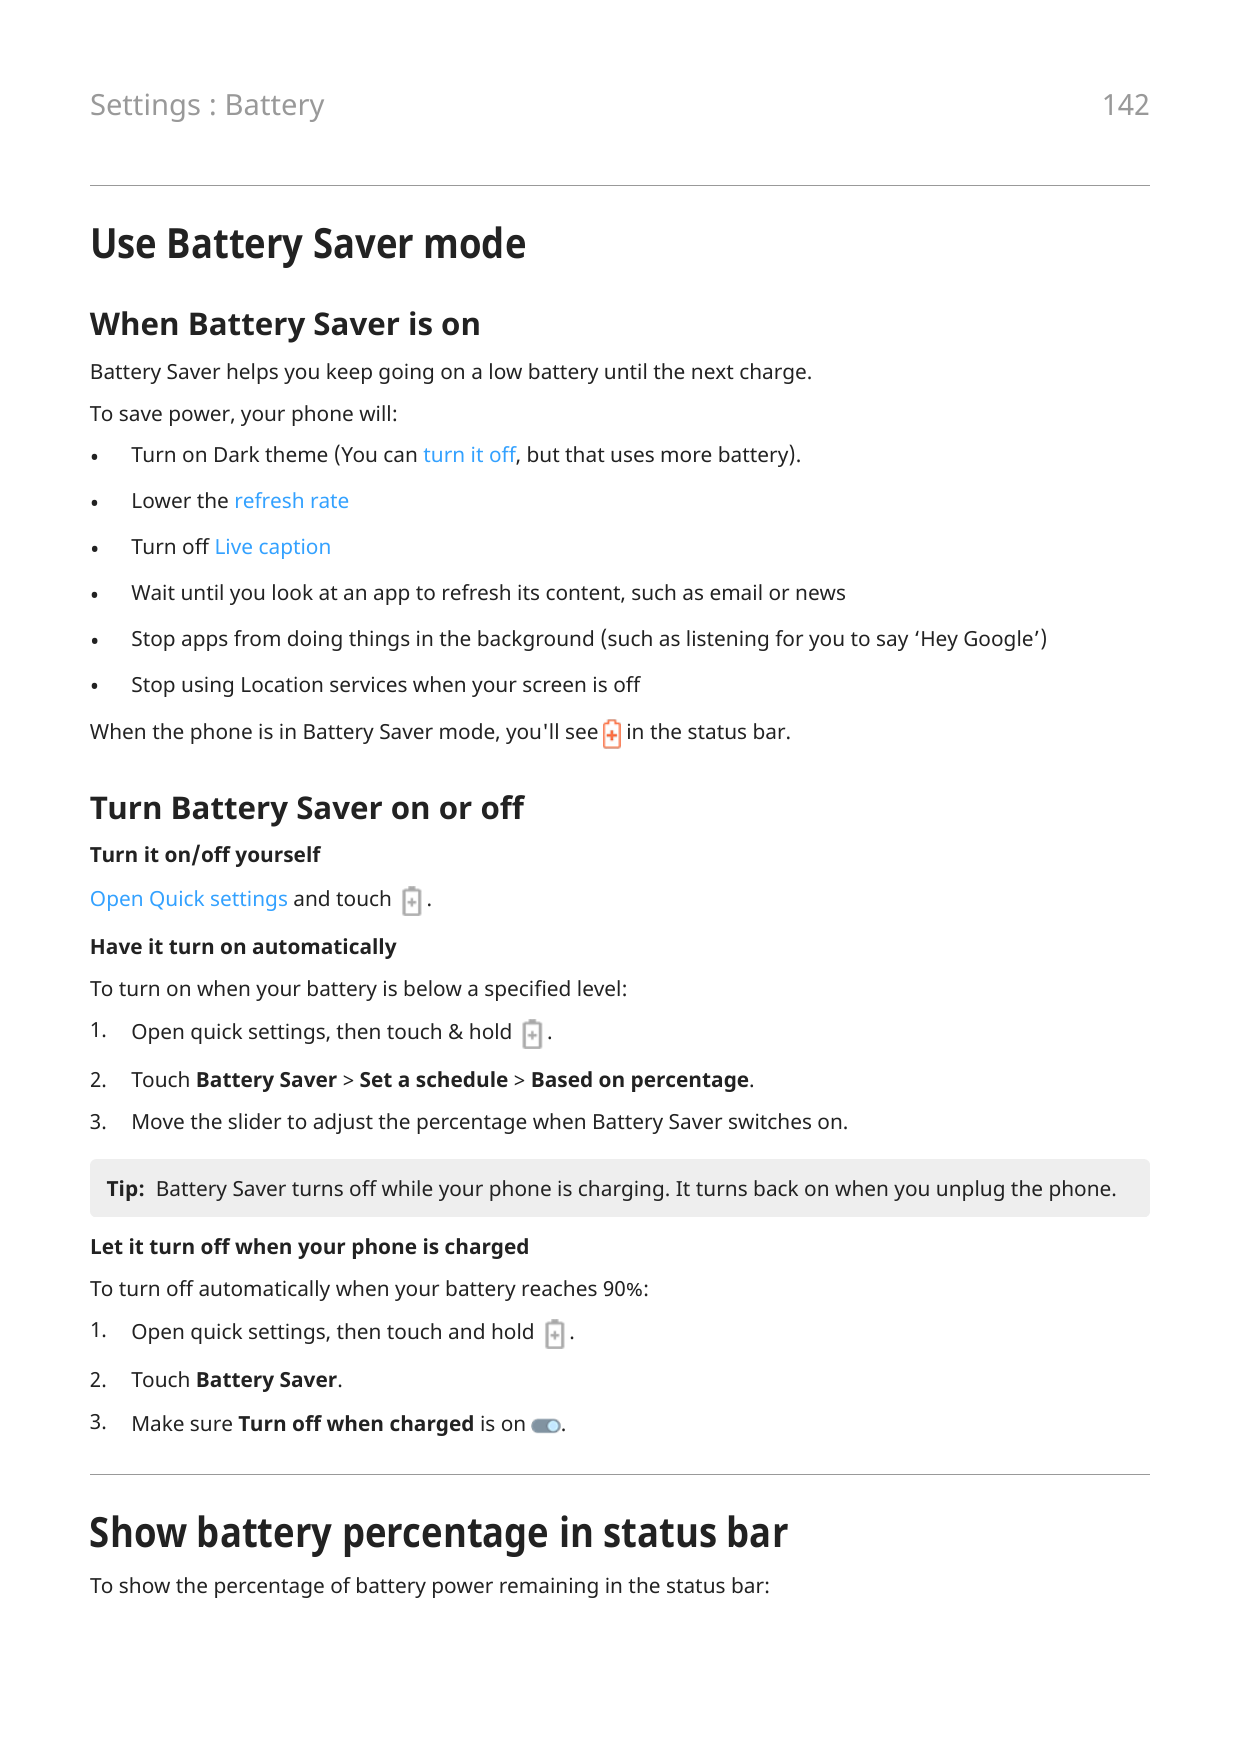 142Settings : BatteryUse Battery Saver modeWhen Battery Saver is onBattery Saver helps you keep going on a low battery until the